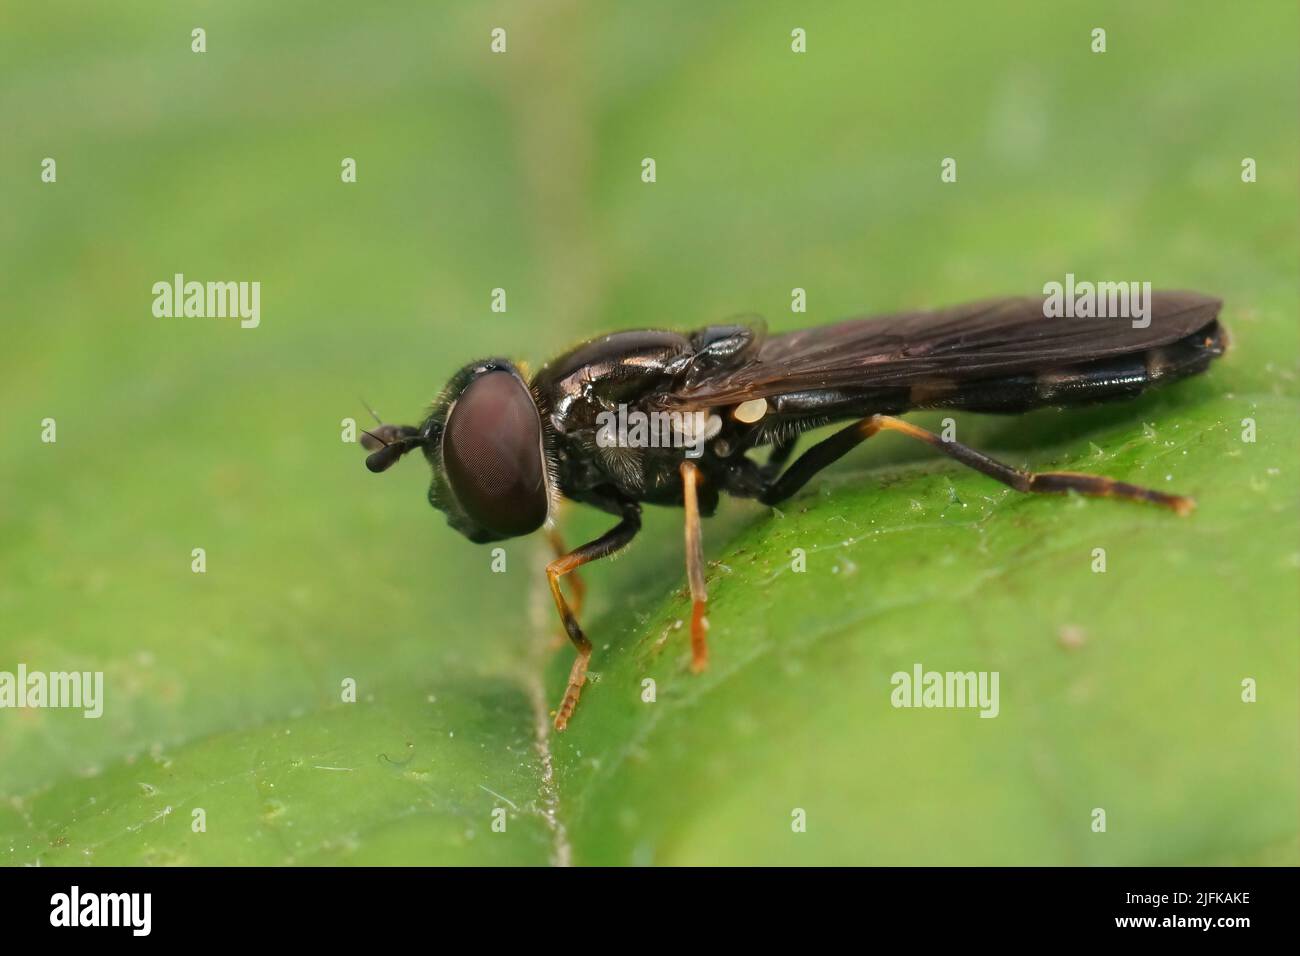 Closeup on a small dark hoverfly, Pyrophaena rosarum sitting on a green leaf in the field Stock Photo